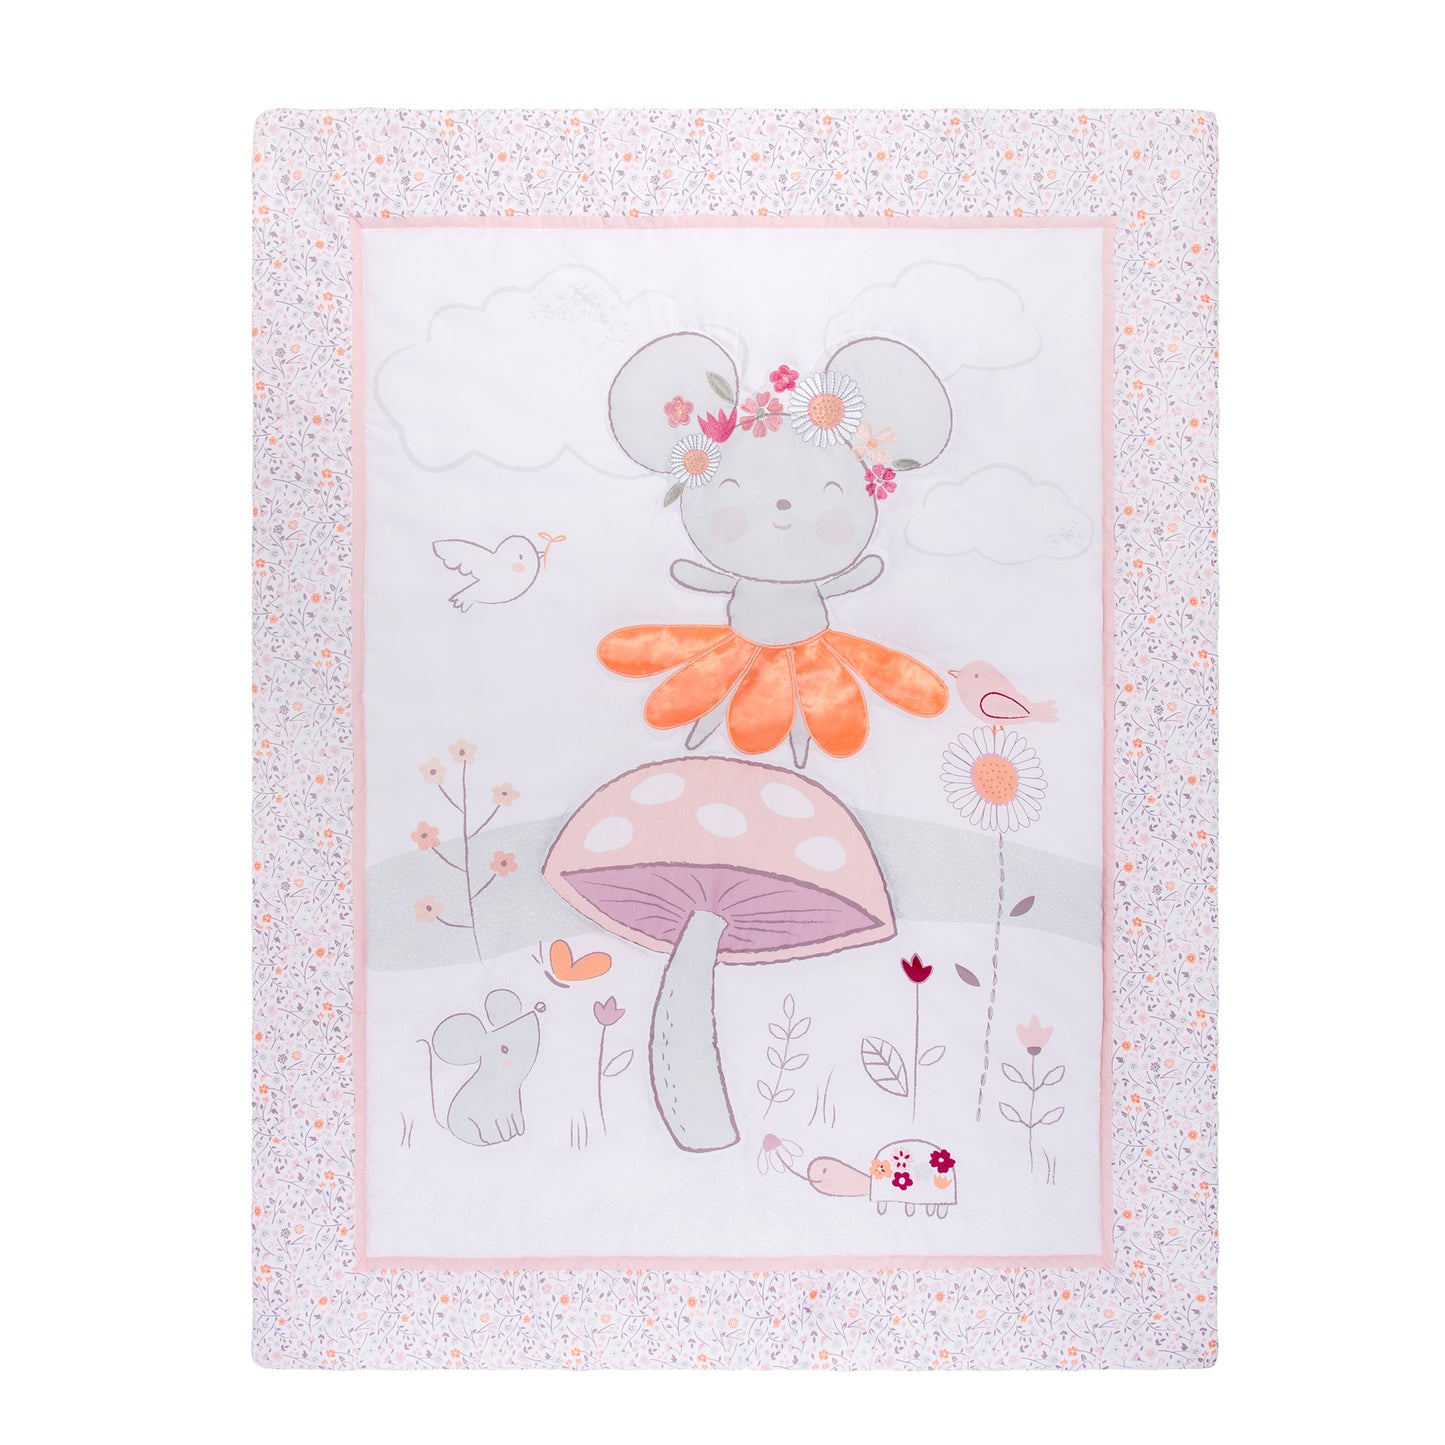  Dancing Mouse 4 Piece Crib Bedding Set by Sammy & Lou®; crib quilt front facing design 